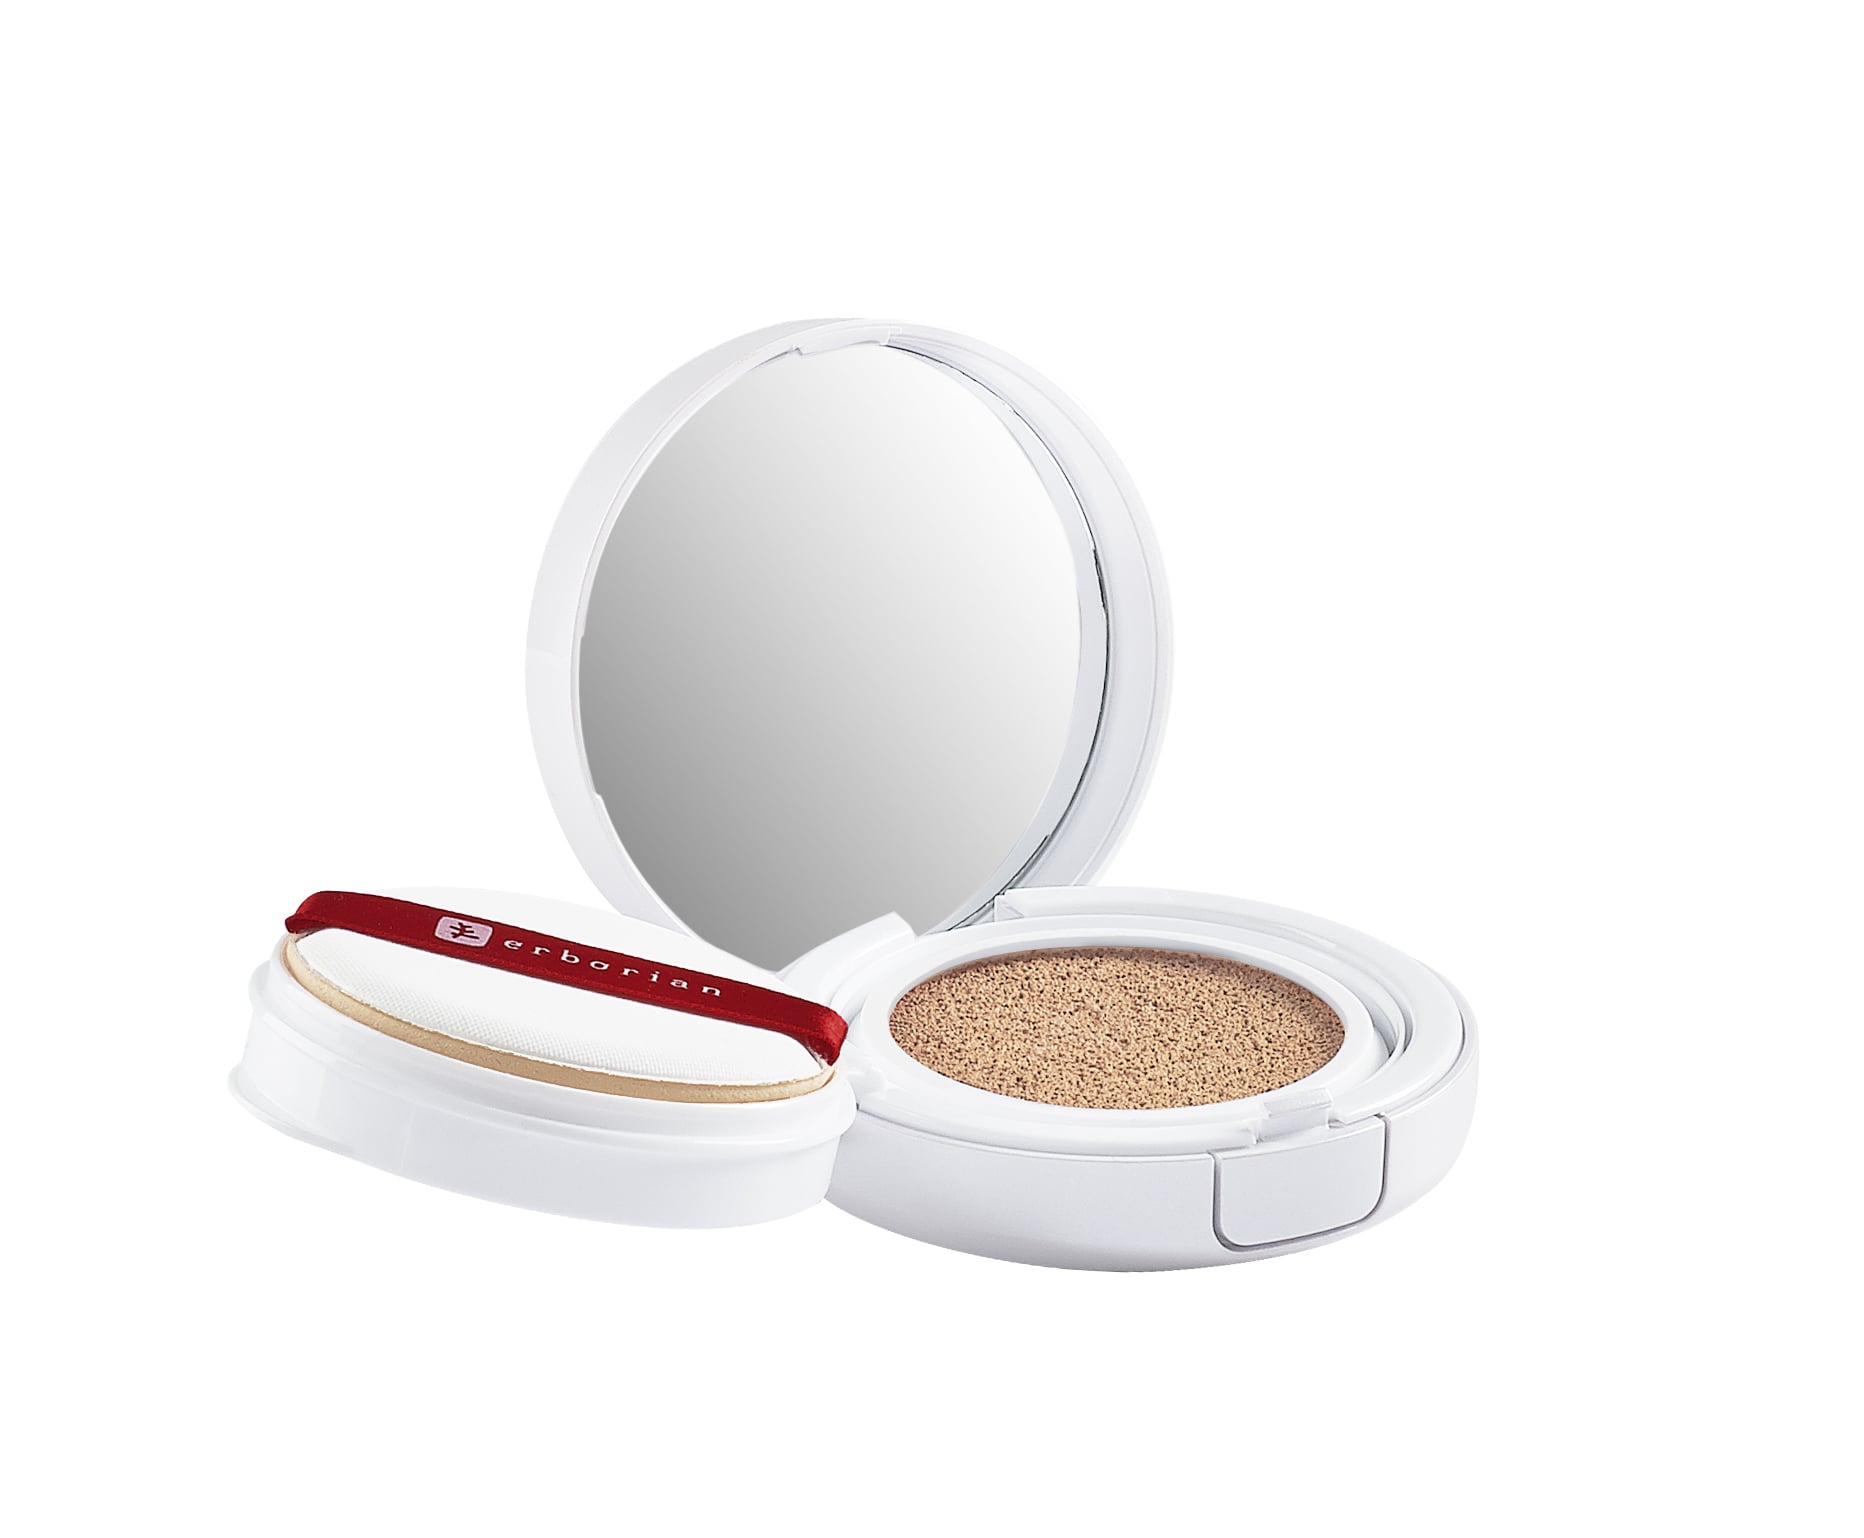 Inspiratie Ingrijpen Barry Erborian Liquid BB Crème Cushion Compact | 15 Buzzy, Brand-New Korean  Beauty Products Out For Fall 2016 | POPSUGAR Beauty Photo 6